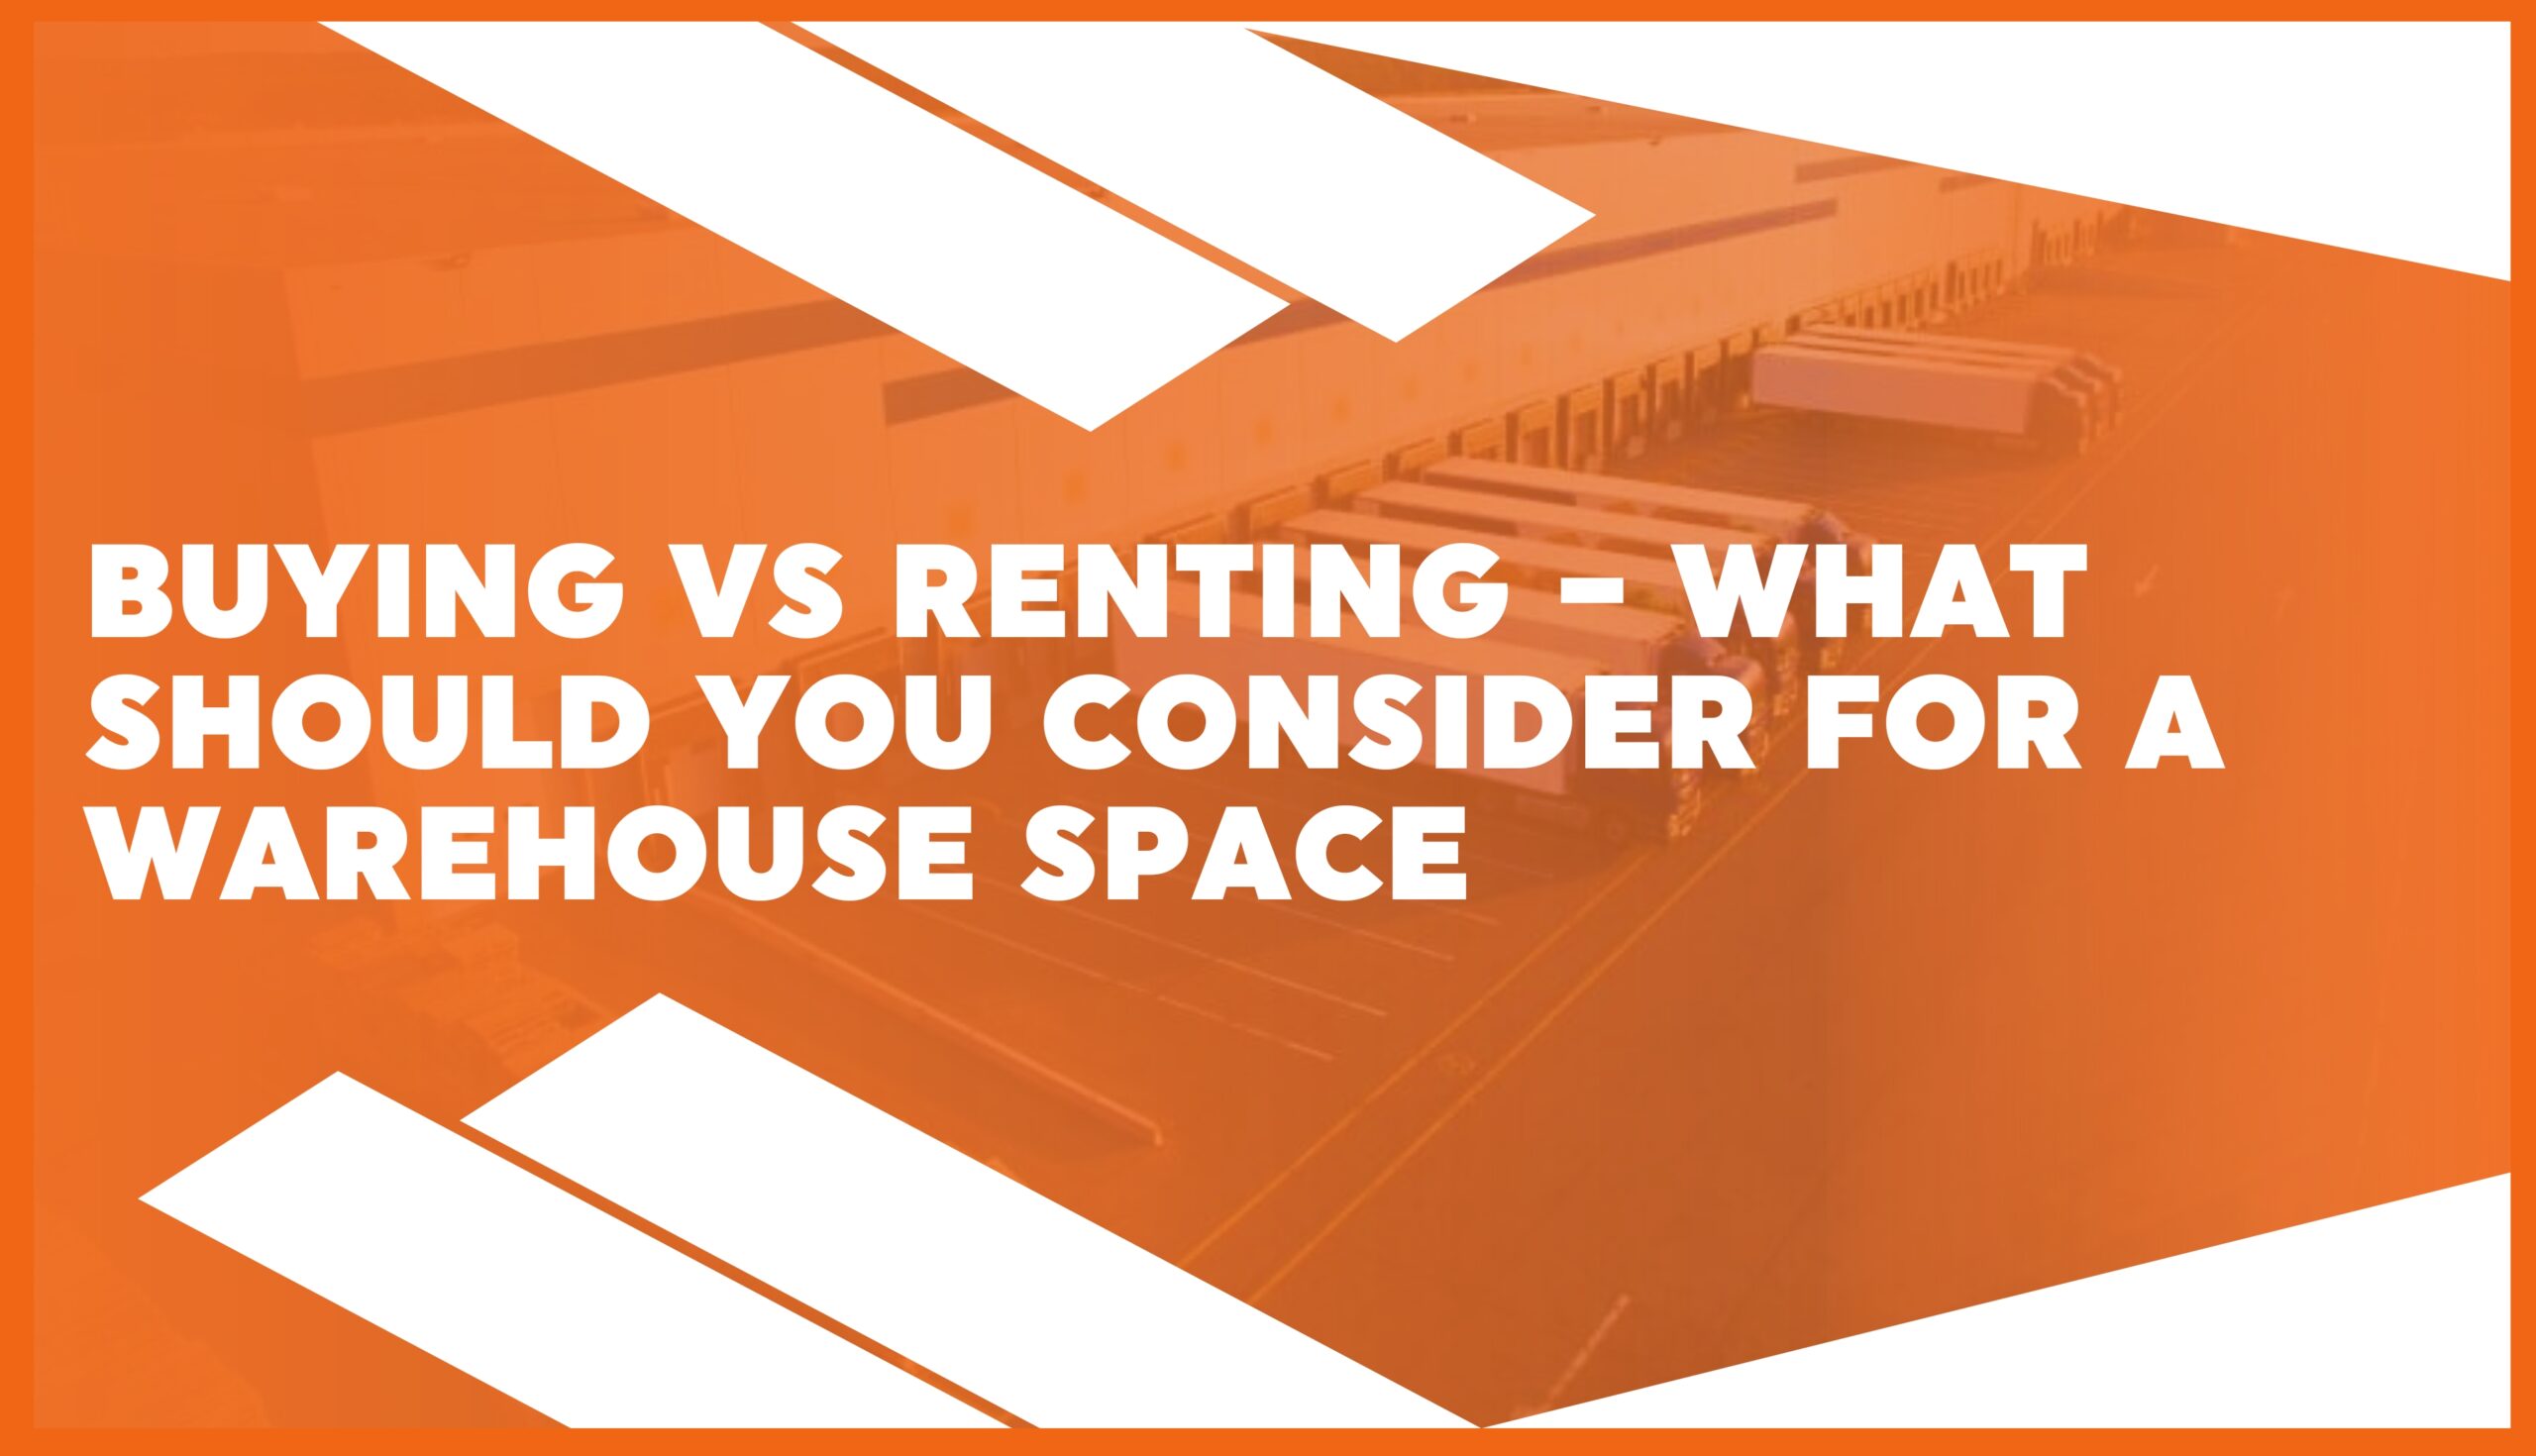 Buying vs Renting – What Should You Consider for a Warehouse Space